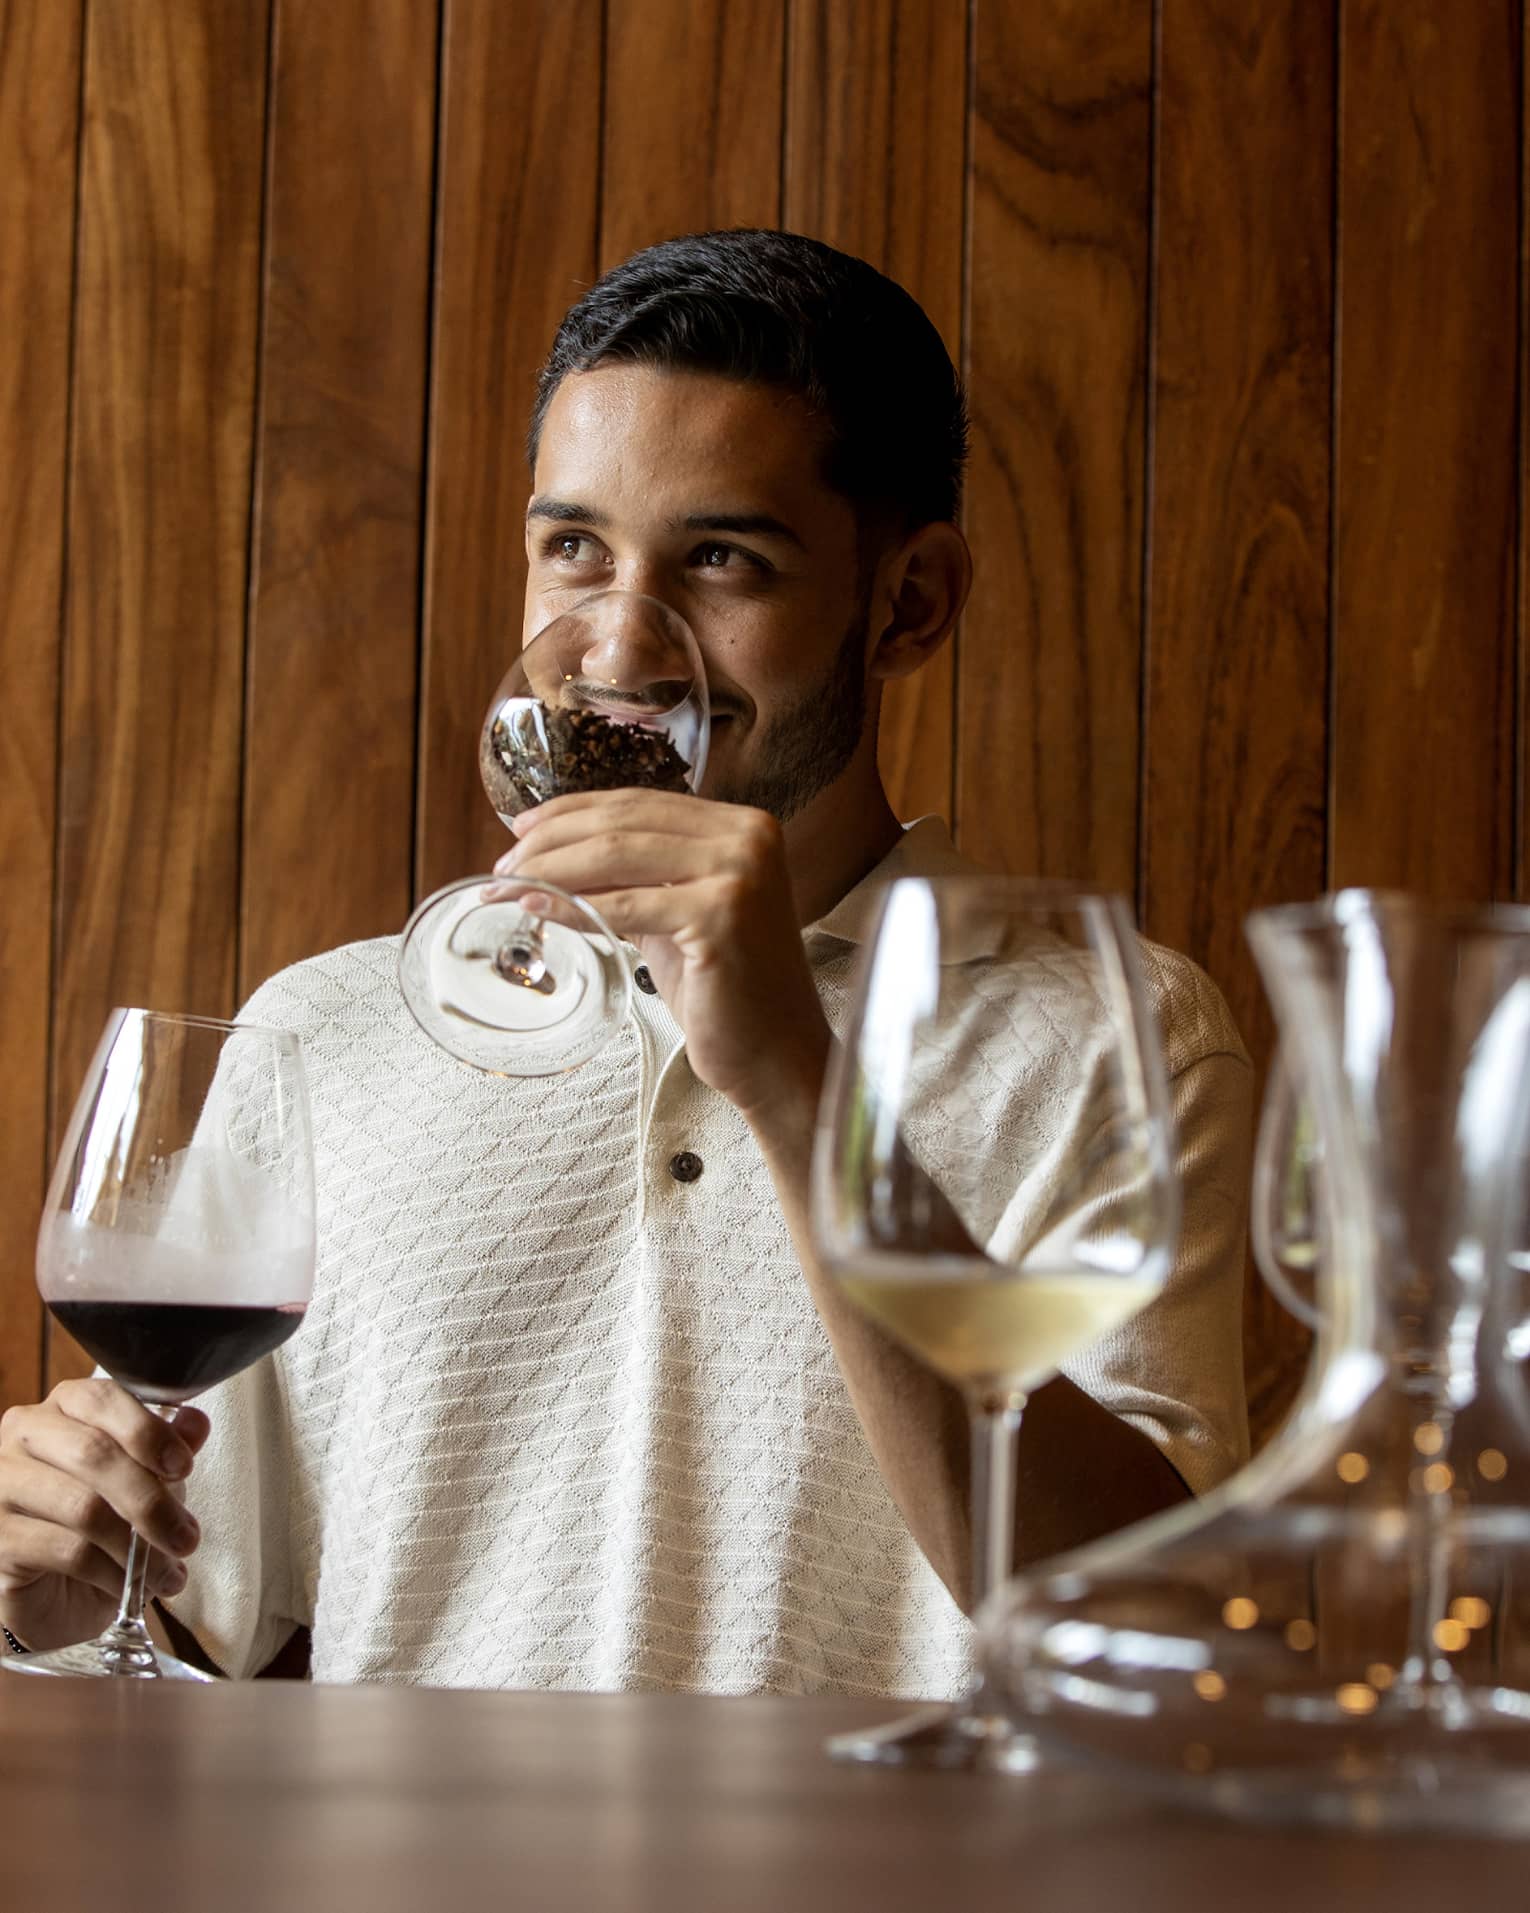 At a wine tasting, a guest smells coffee beans in a glass before tasting the glass of dark red wine held in his other hand. 